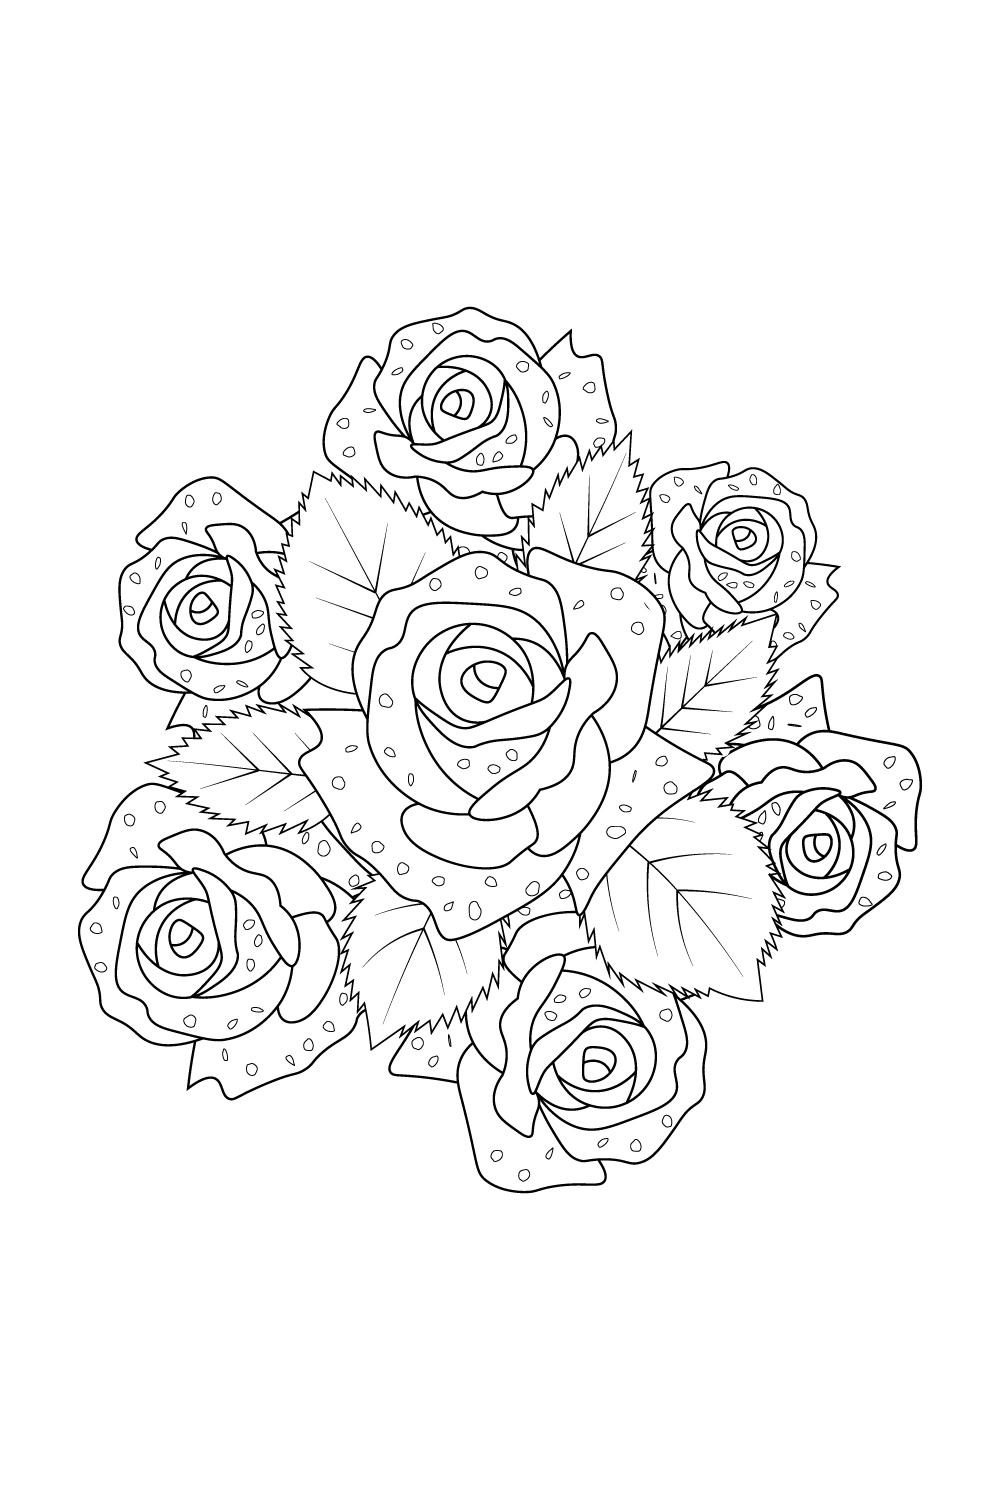 simple rose drawing tattoo